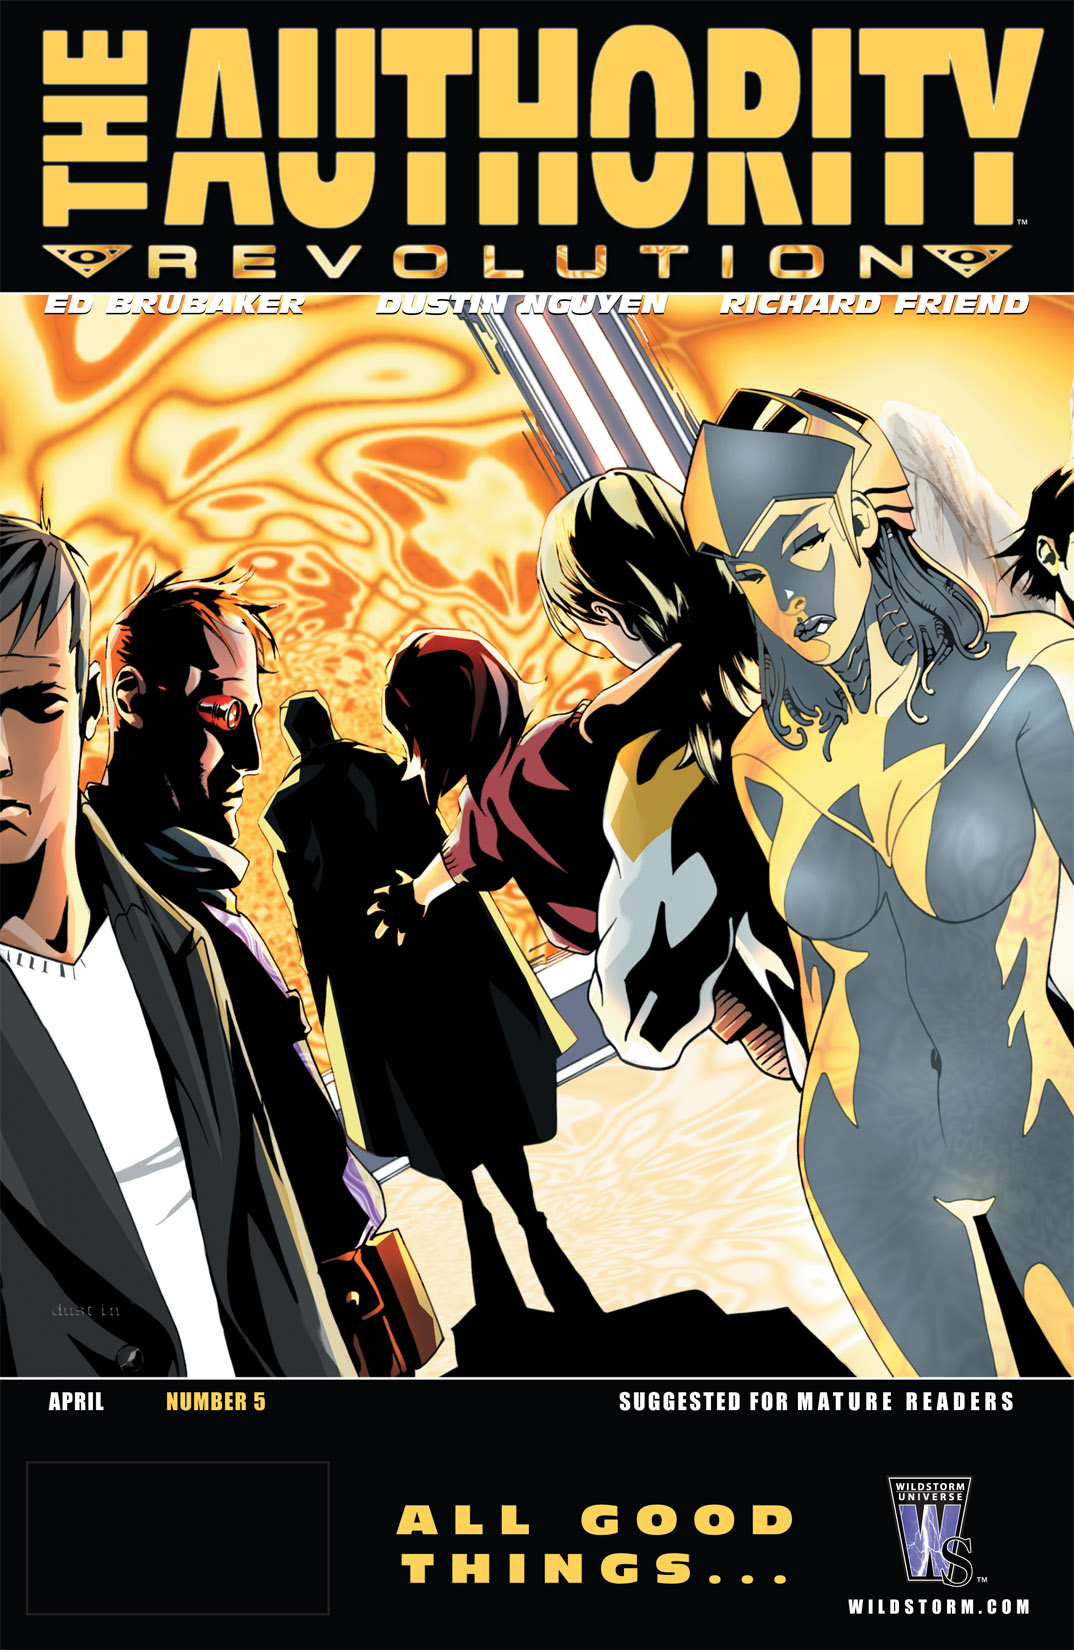 Read online The Authority: Revolution comic -  Issue #5 - 1